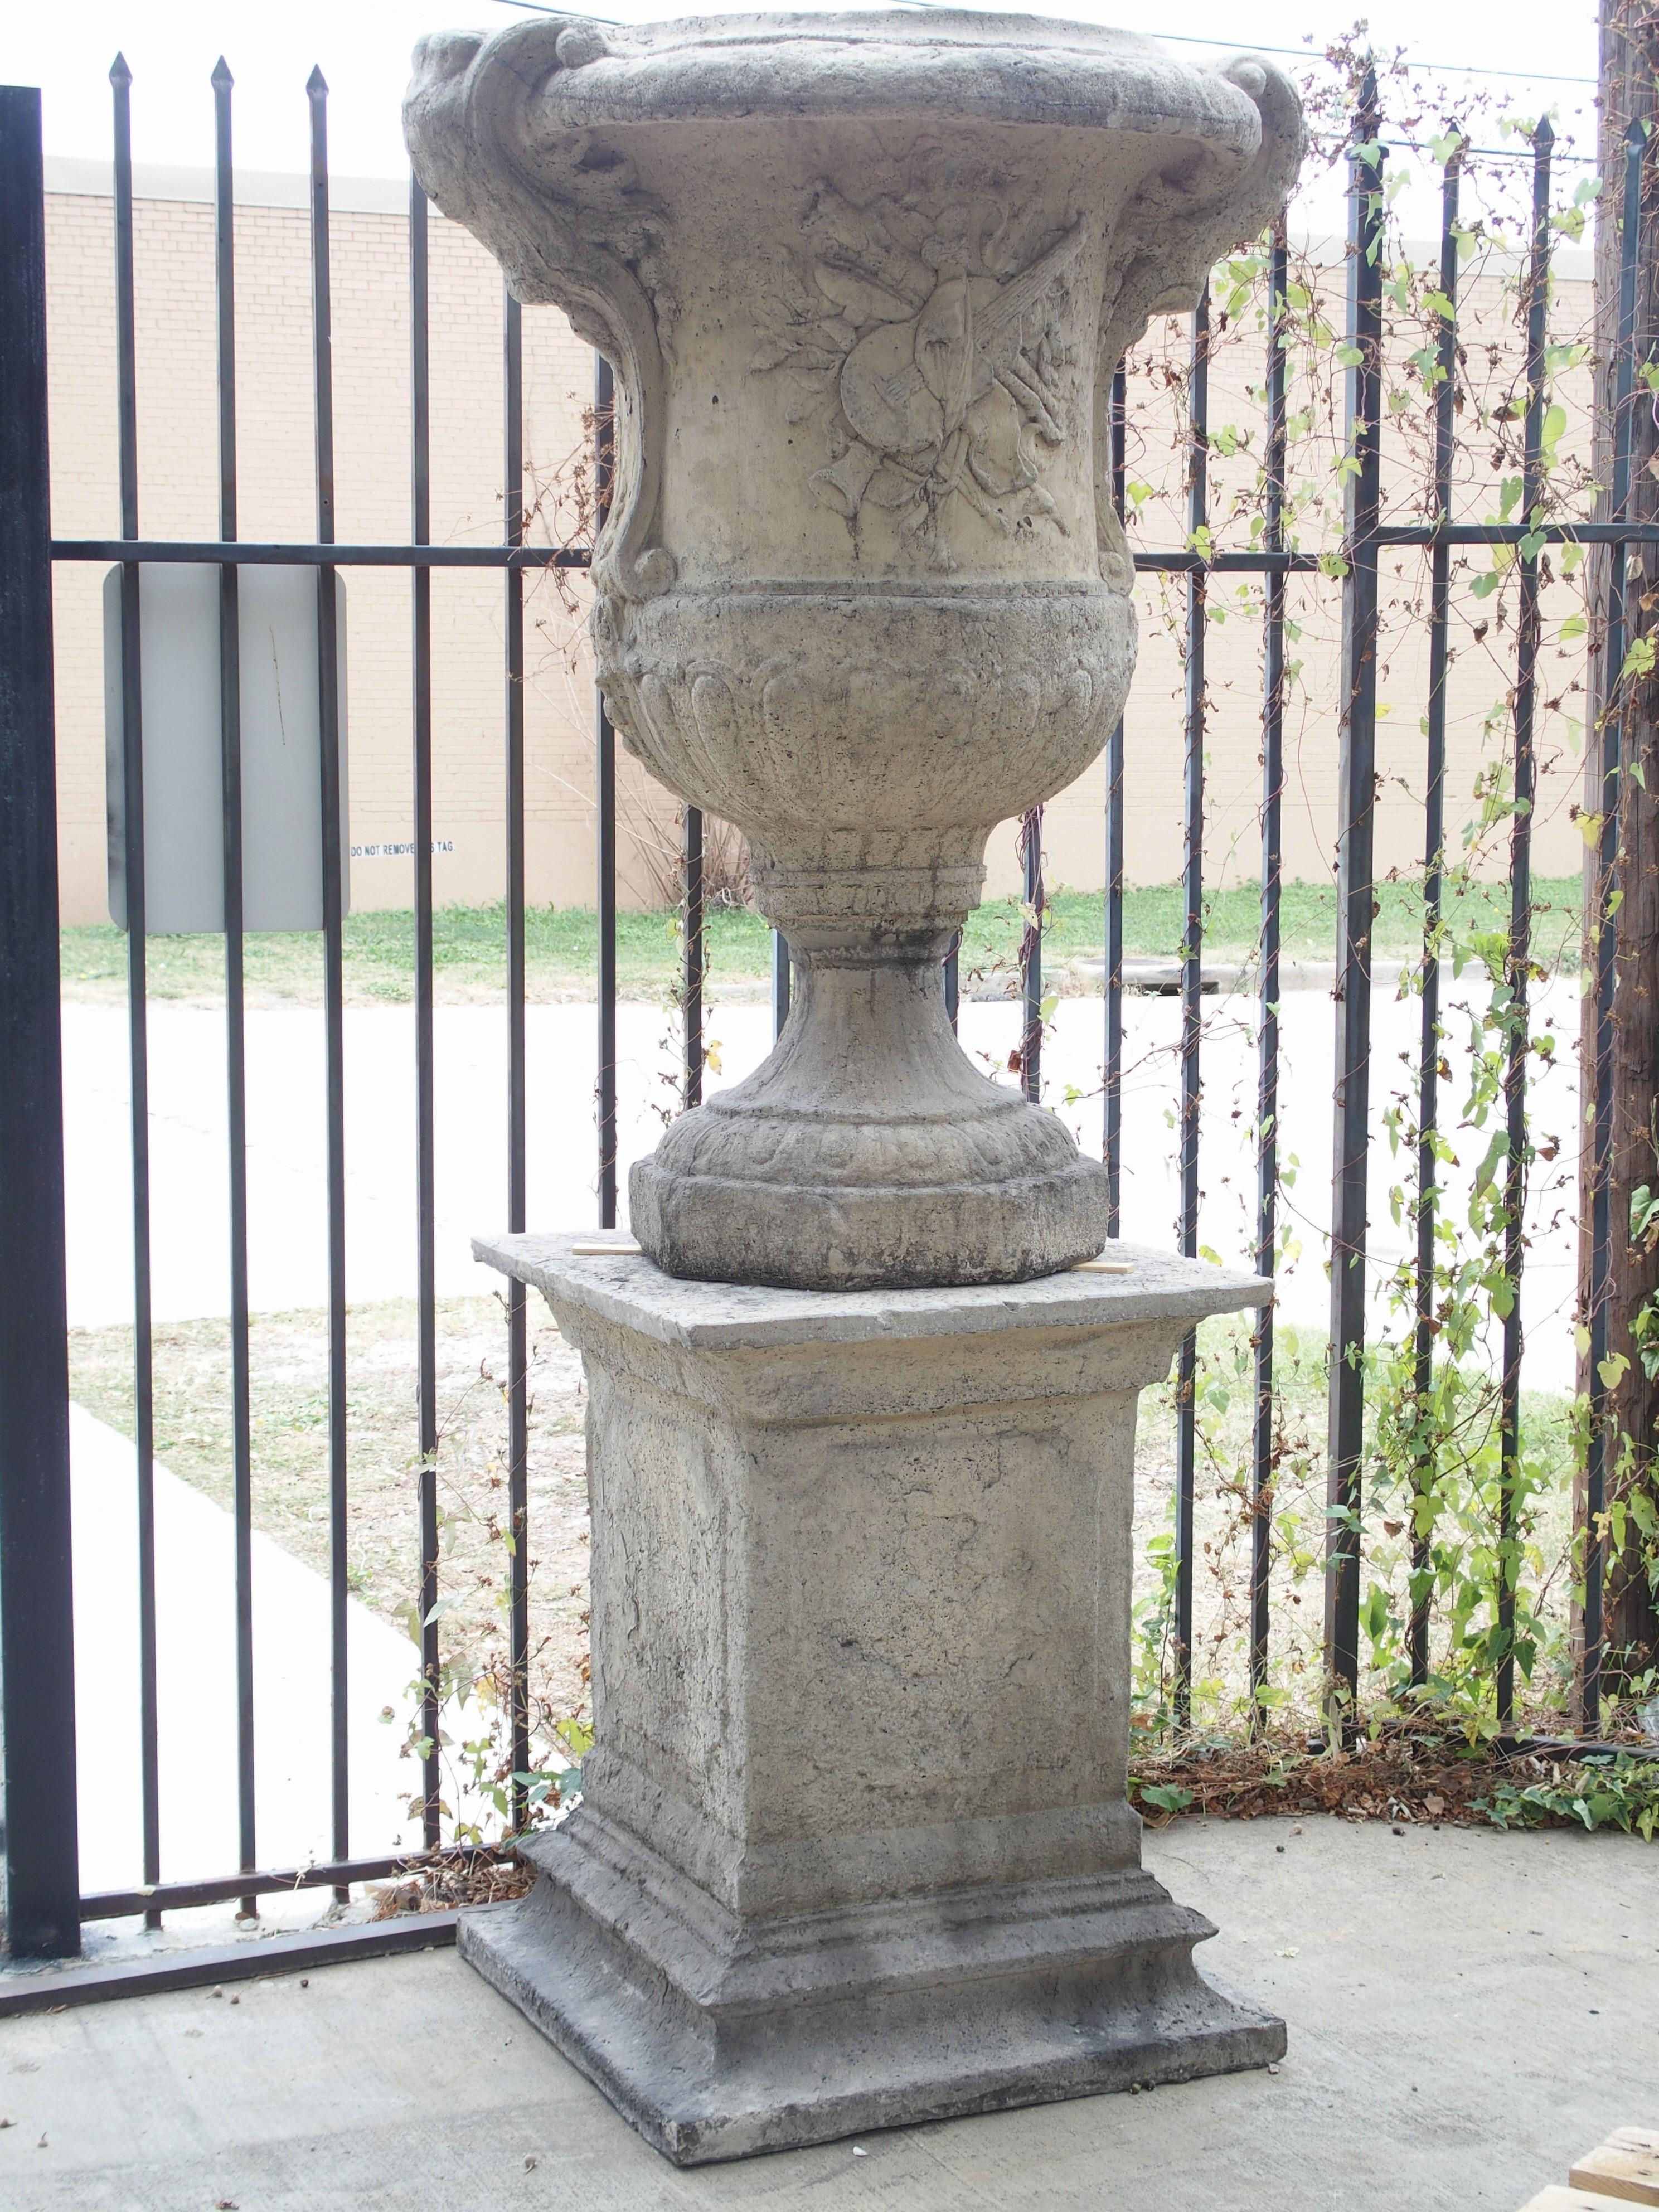 This pair of large cast stone vases on pedestals stands about 7 ½ feet tall and has a great worn texture and antique stone finish. Each vase is adorned with musical trophy decoration on both the front and back sides. The central element of the